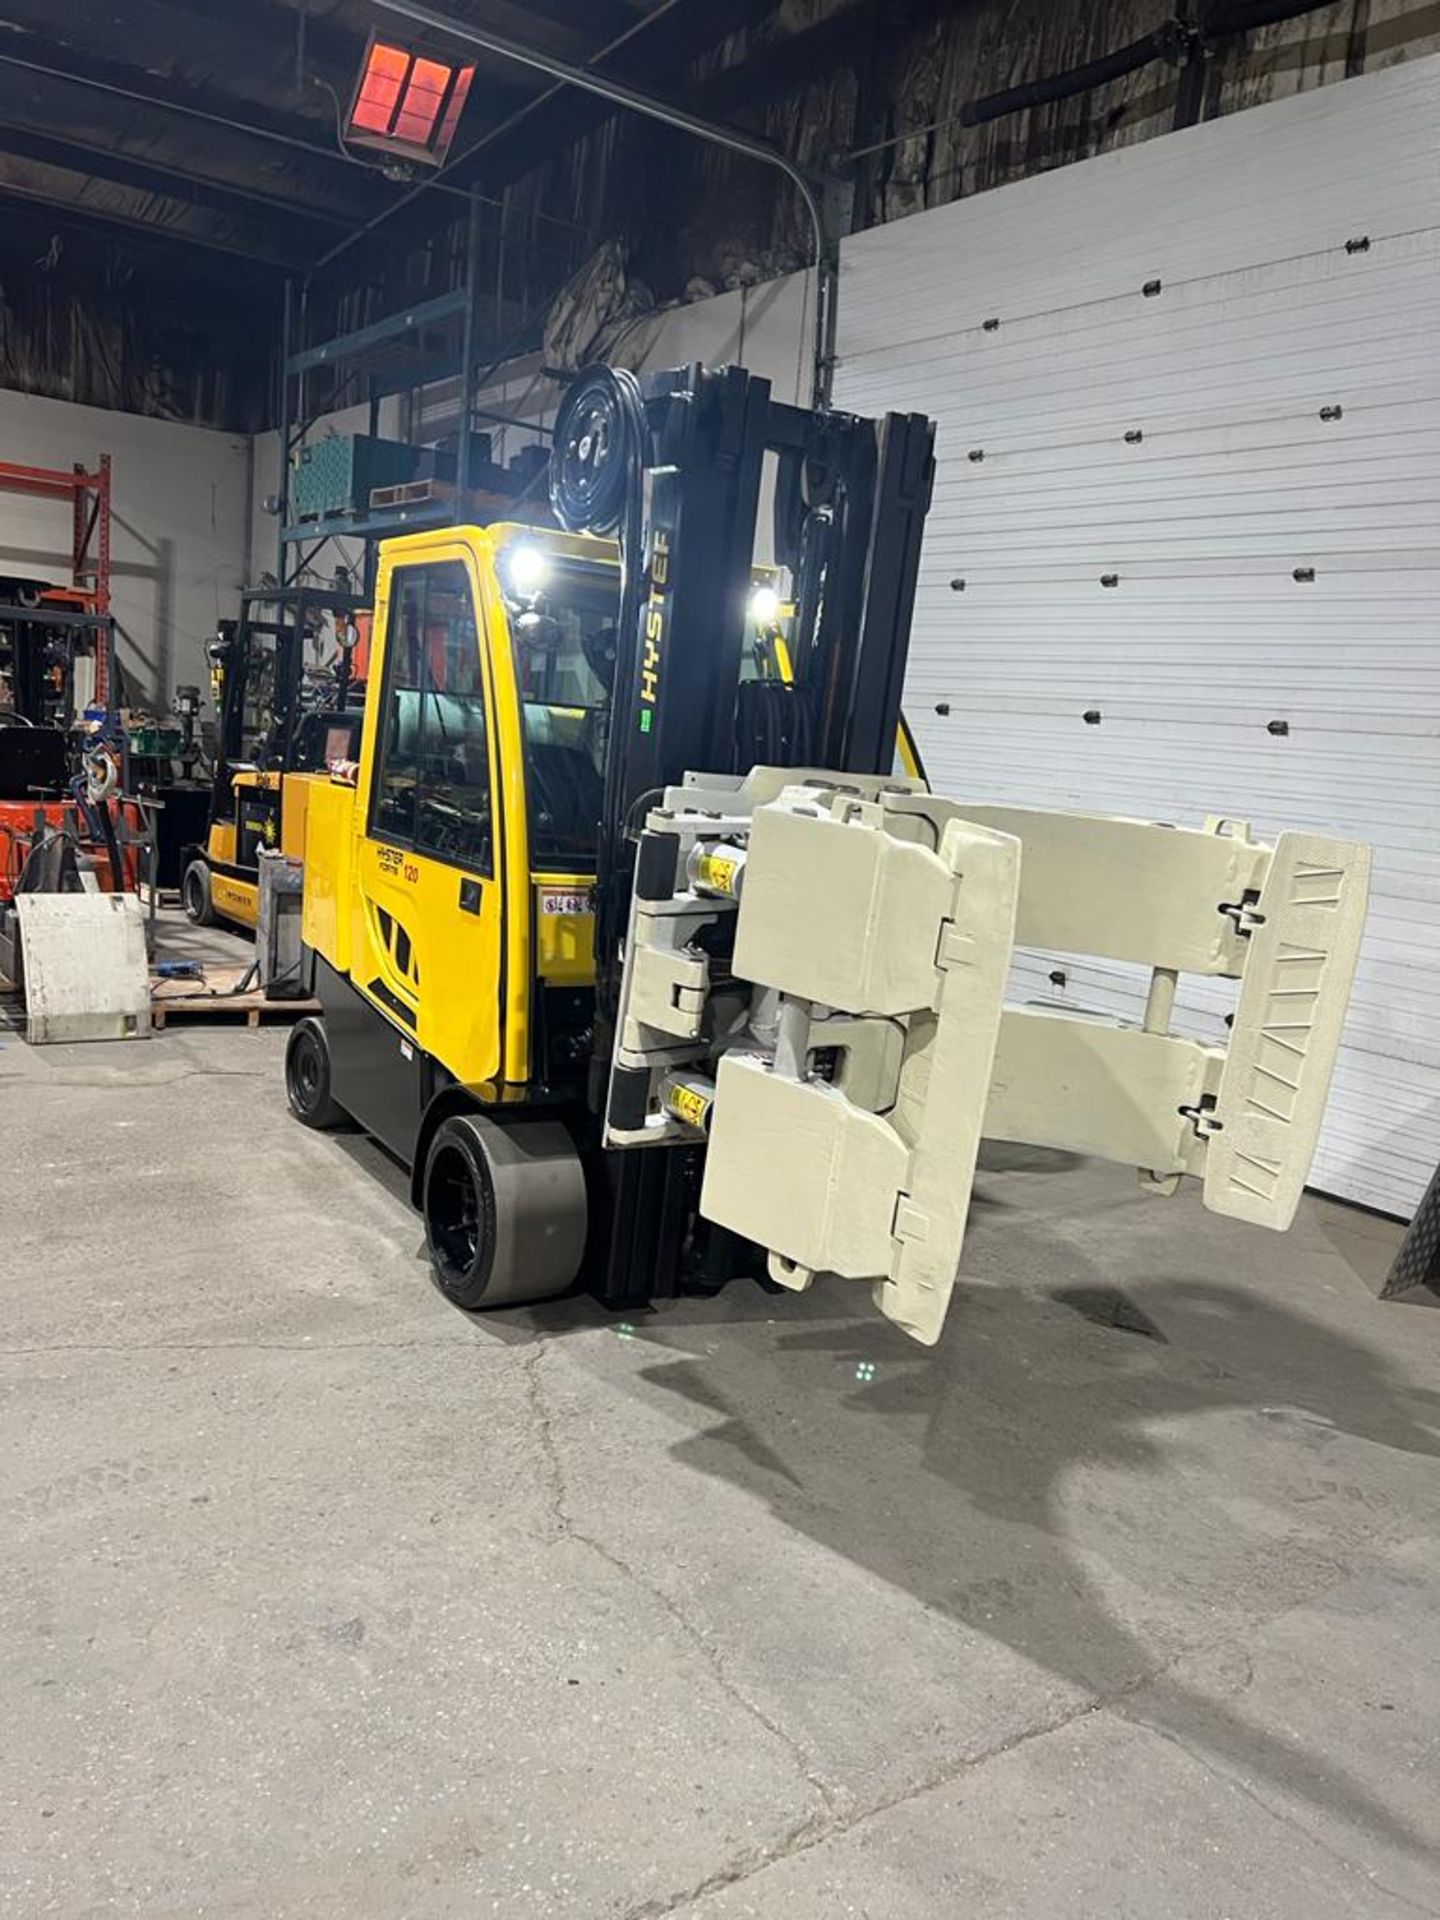 MINT ** 2017 Hyster 120 - 12,000lbs Capacity Forklift CASCADE ROLL CLAMP with CAB & Sideshift - Image 5 of 7